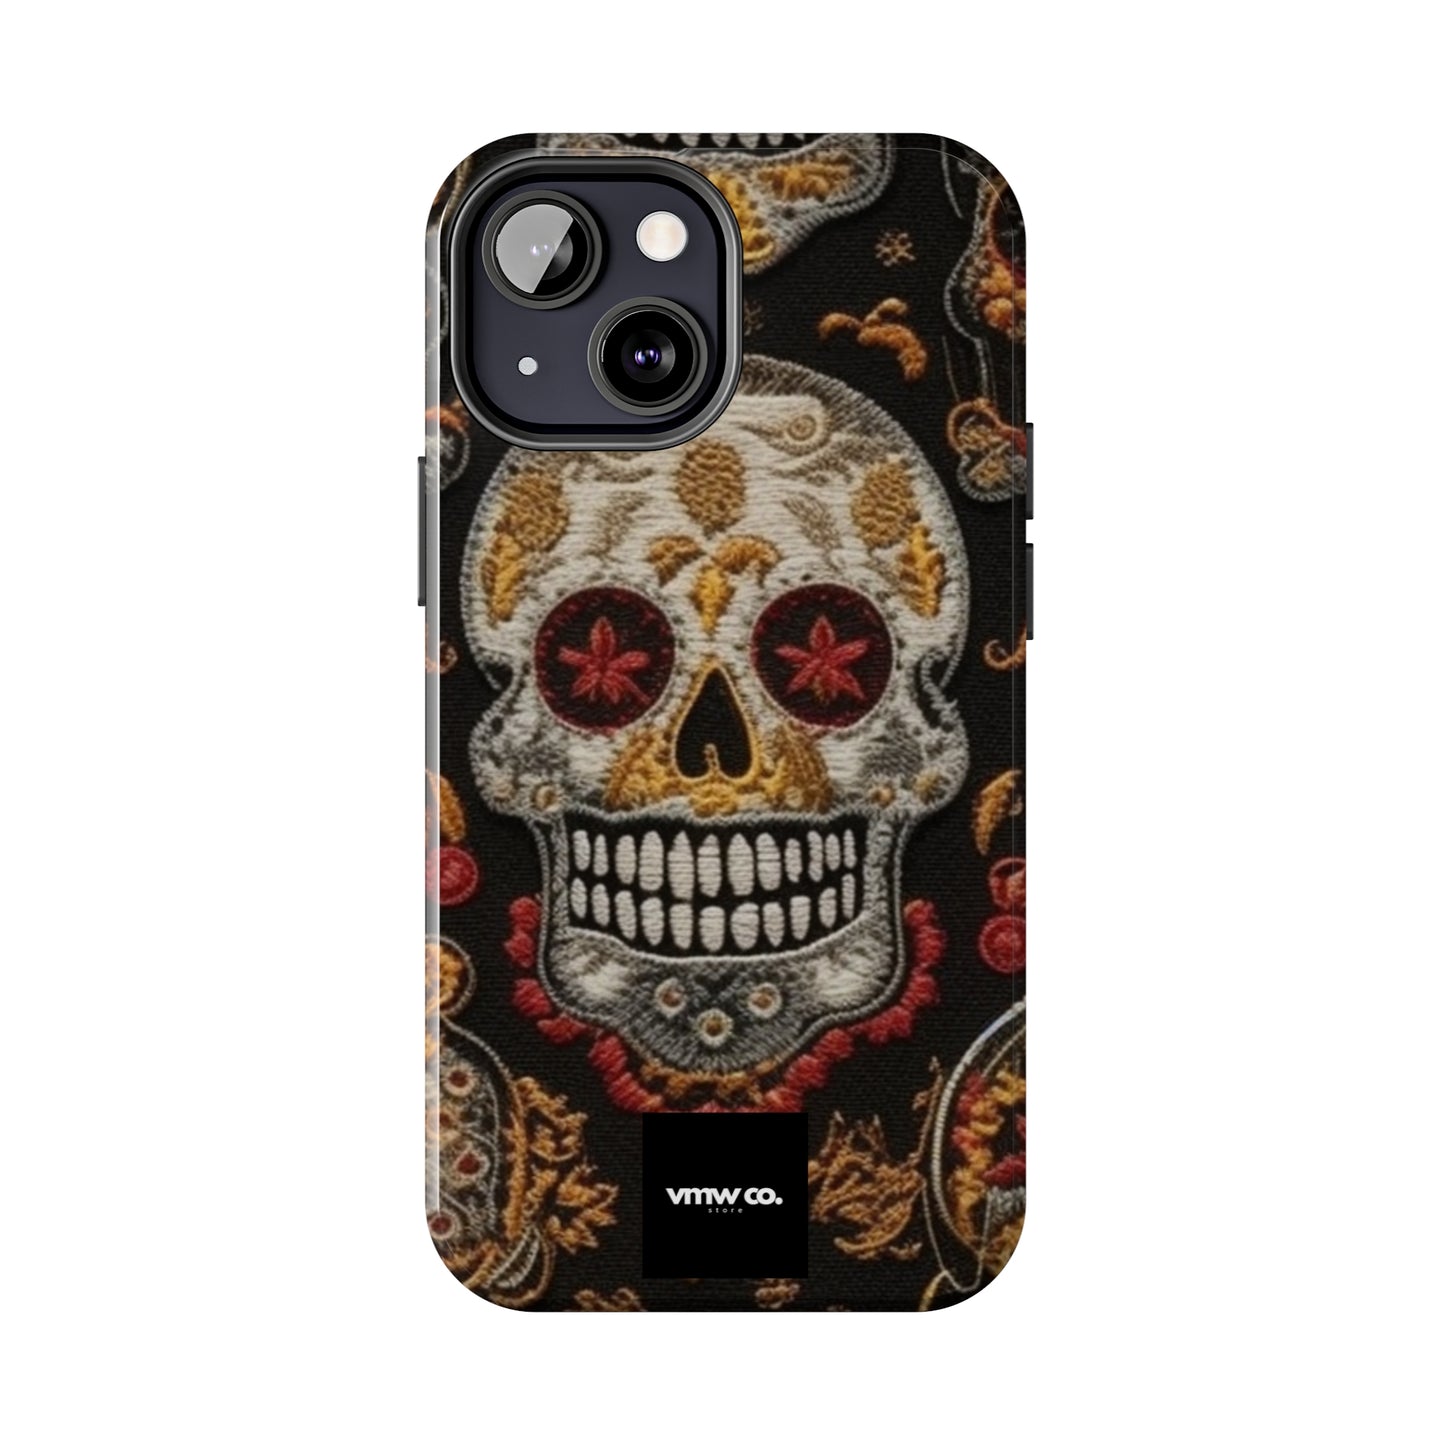 Embroidered Skulls iPhone Tough Phone Cases